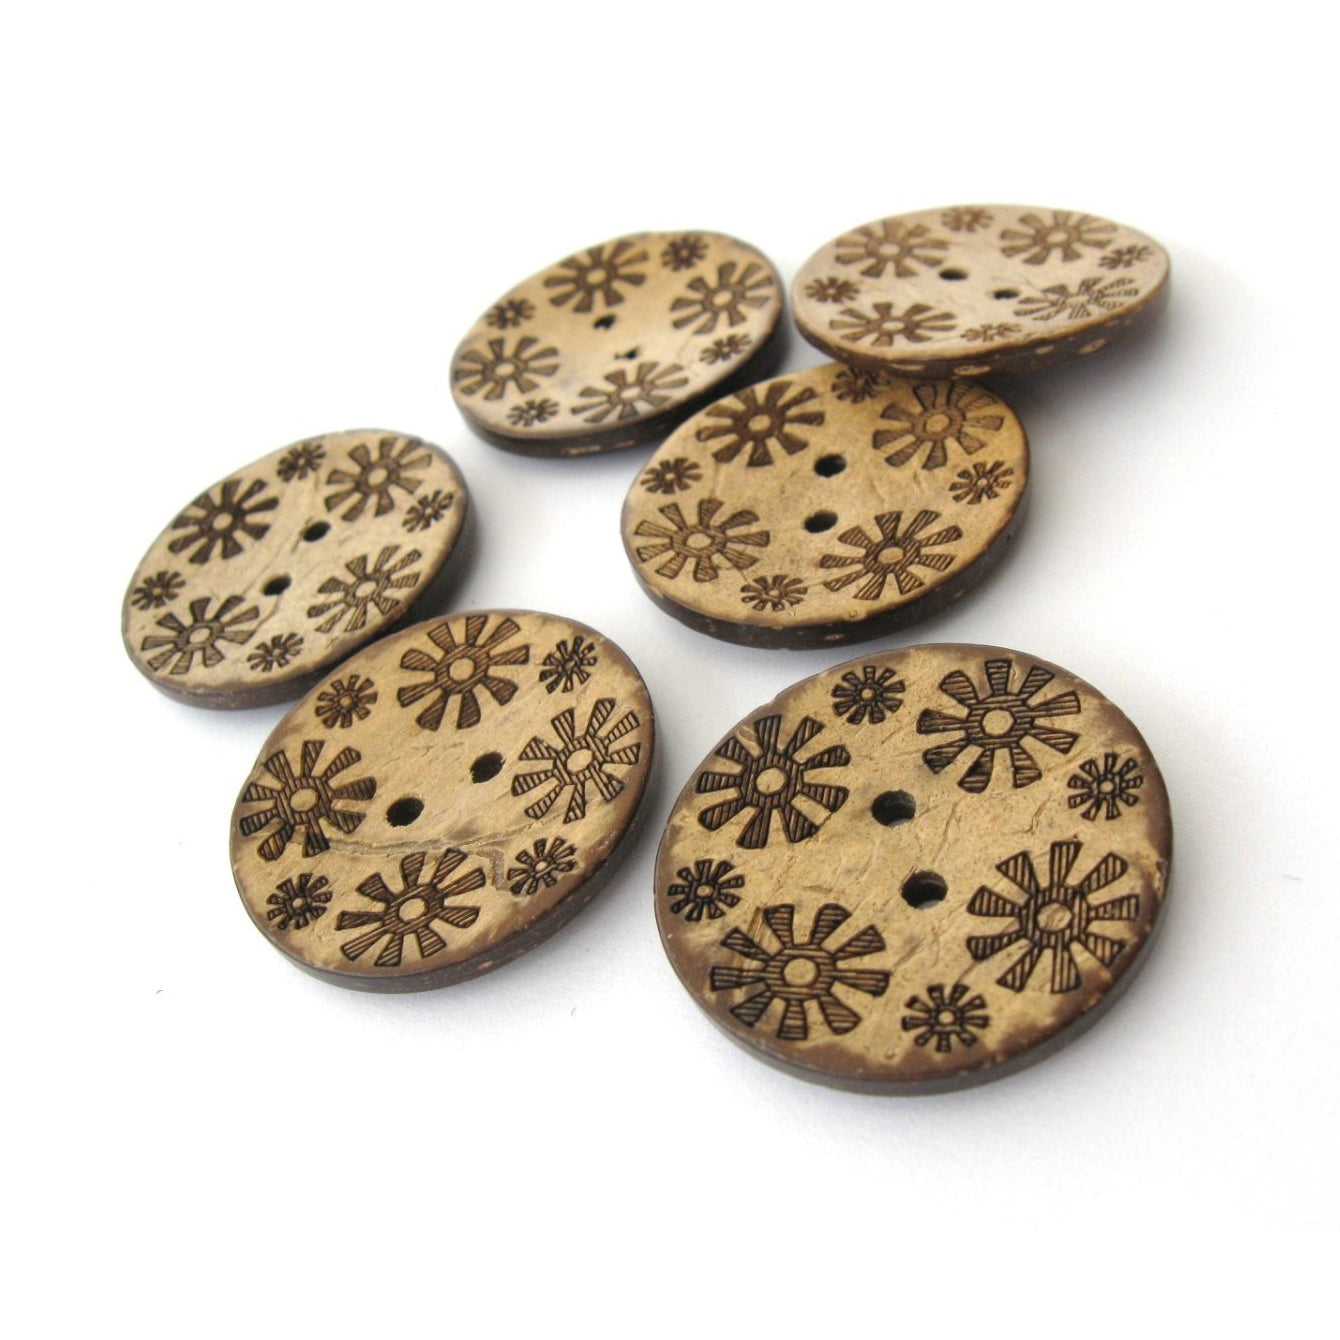 CLYAIYL 30 PCS Resin Sewing Buttons, 28mm/1.1 inch Round Bulk Buttons for  Sewing, with 3 Matte Pattern Size 4 Holes, for Sewing DIY Crafts, Handmade